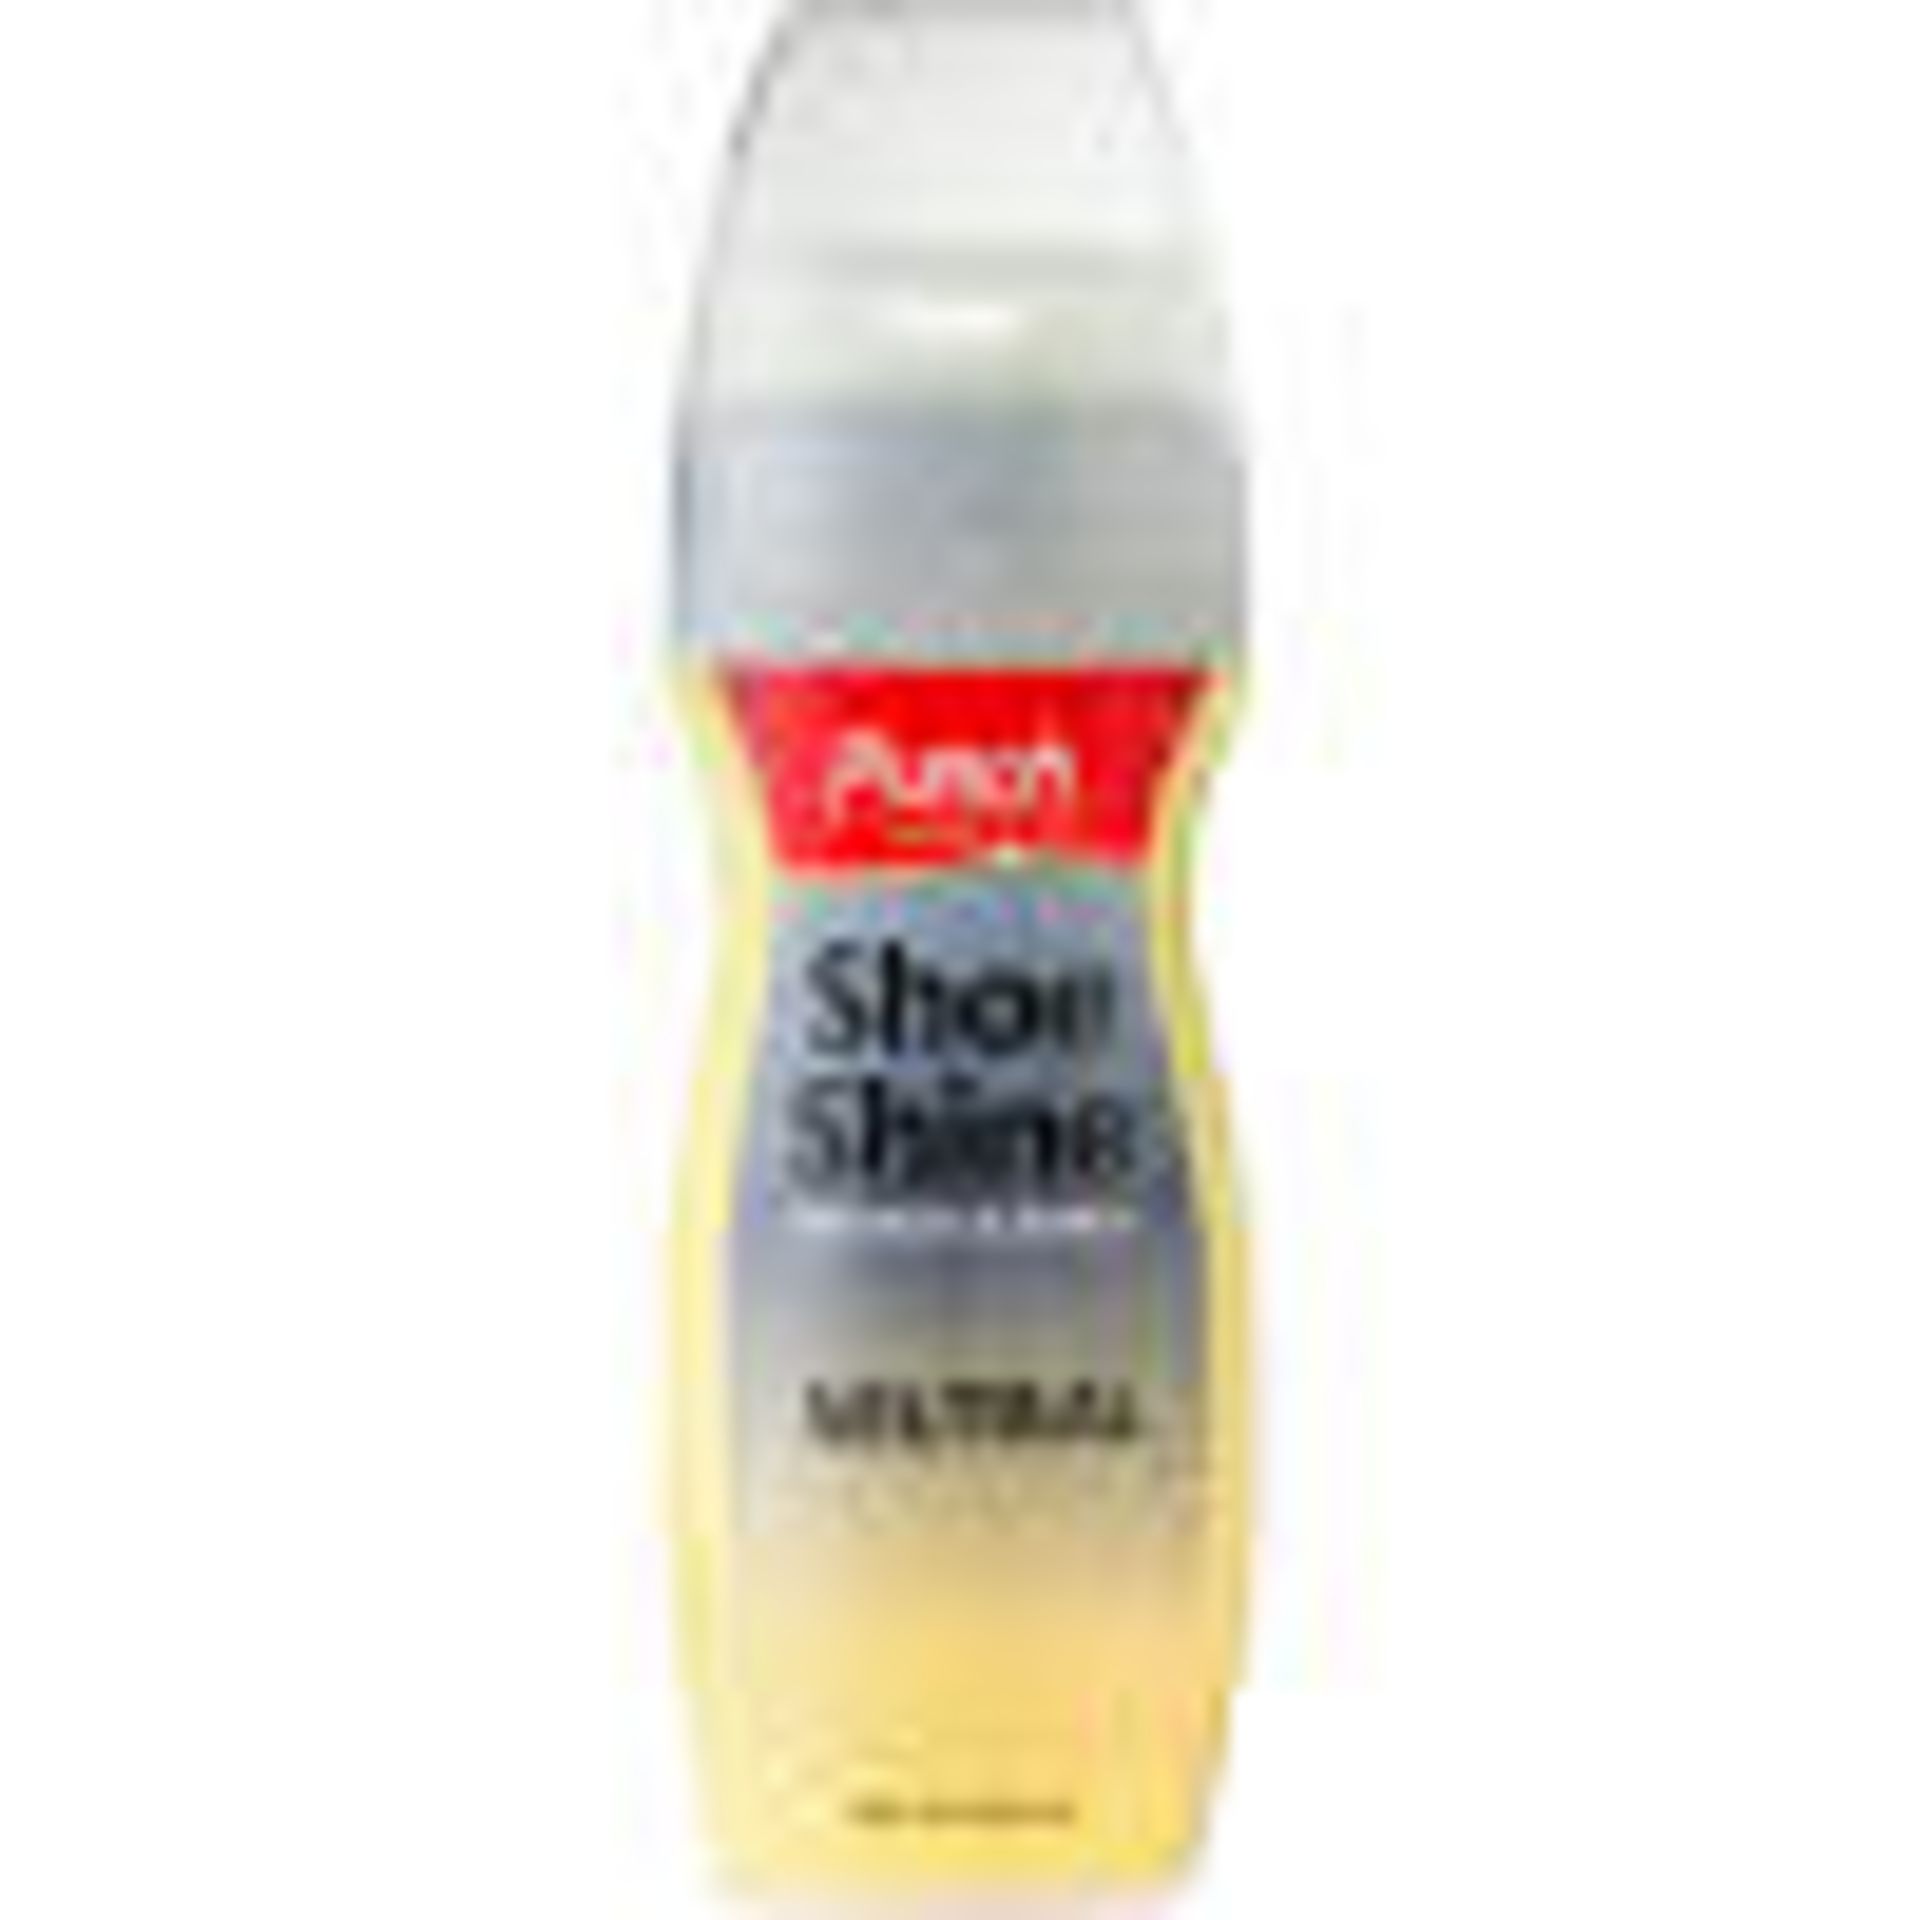 V Brand New Ten 75ml Punch Neutral Shoe Shine ISP £24-90 (Robert Dyas) Item Varies From Image